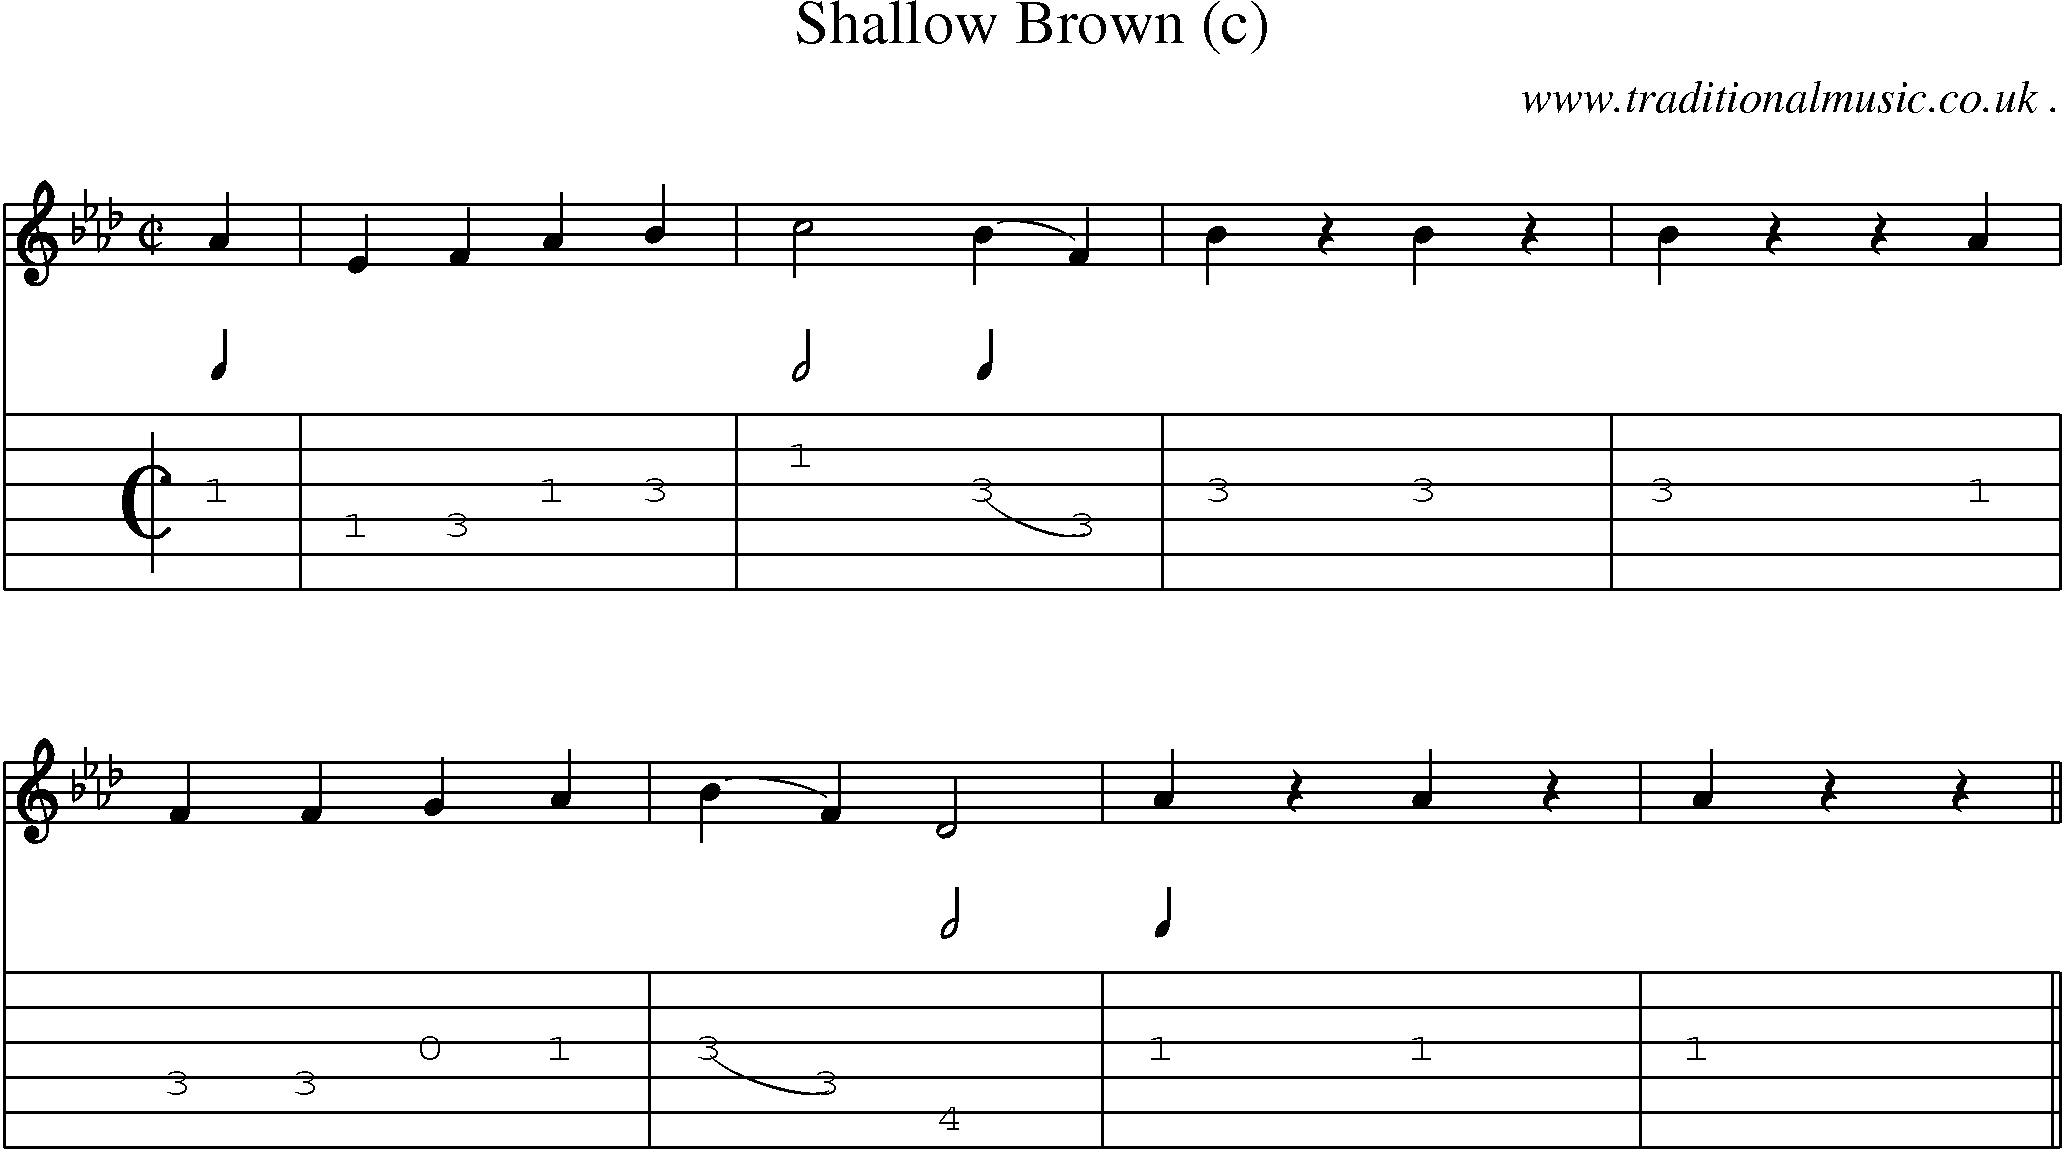 Sheet-Music and Guitar Tabs for Shallow Brown (c)